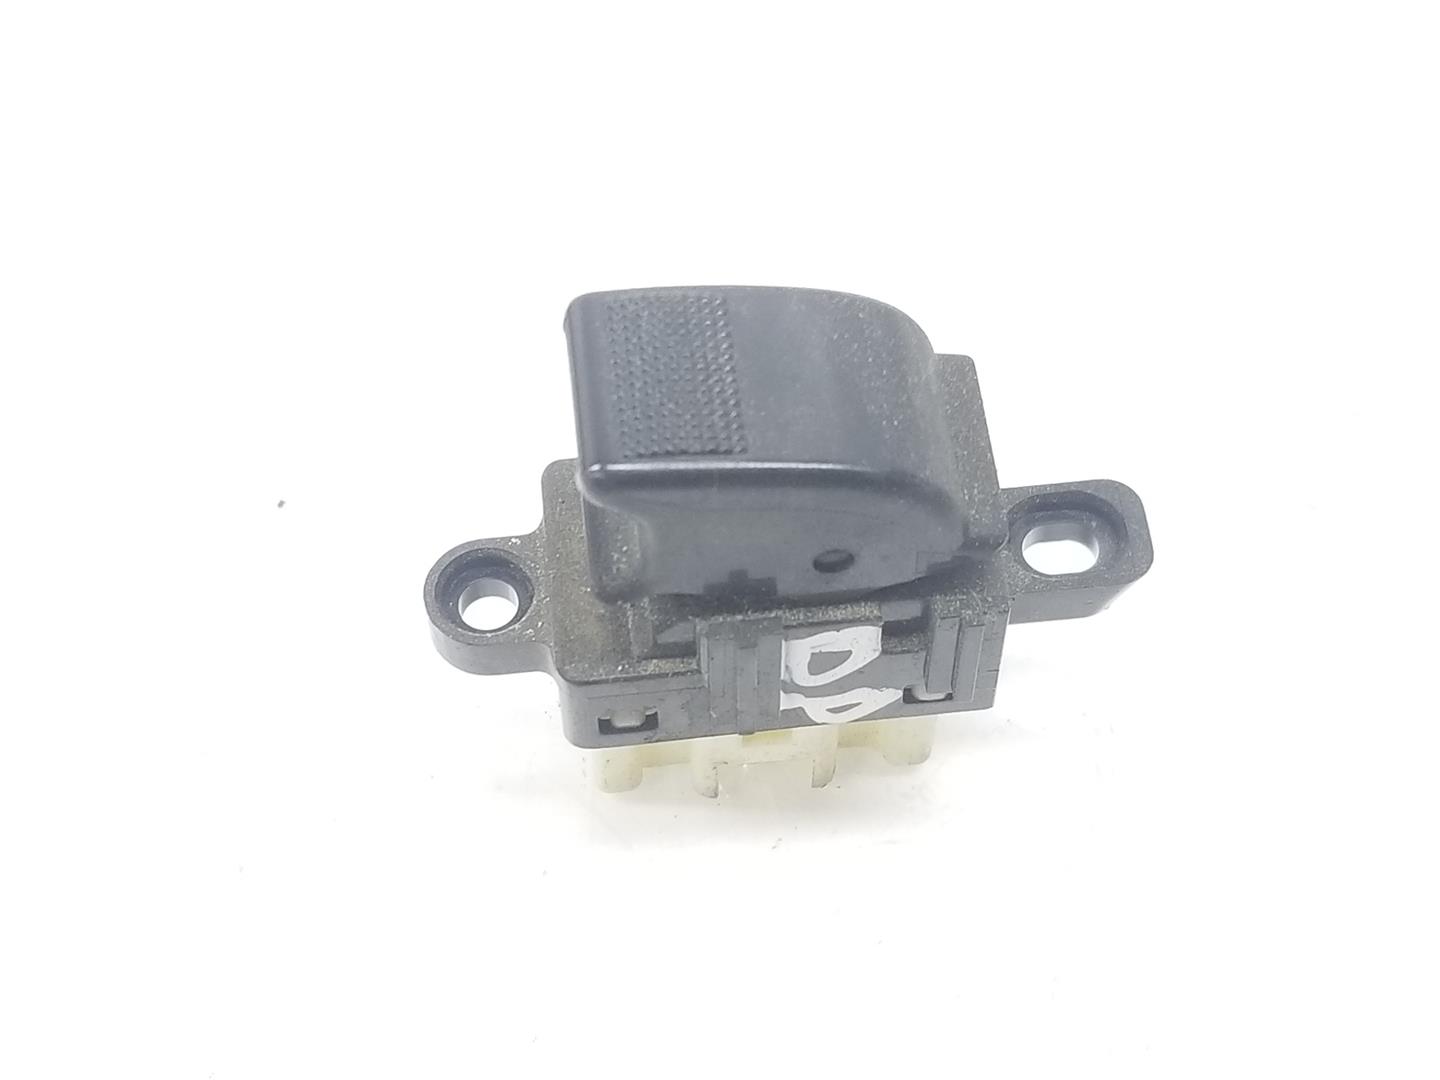 MAZDA 323 BJ (1998-2003) Front Right Door Window Switch GE4T66370A, GE4T66370A 19866952